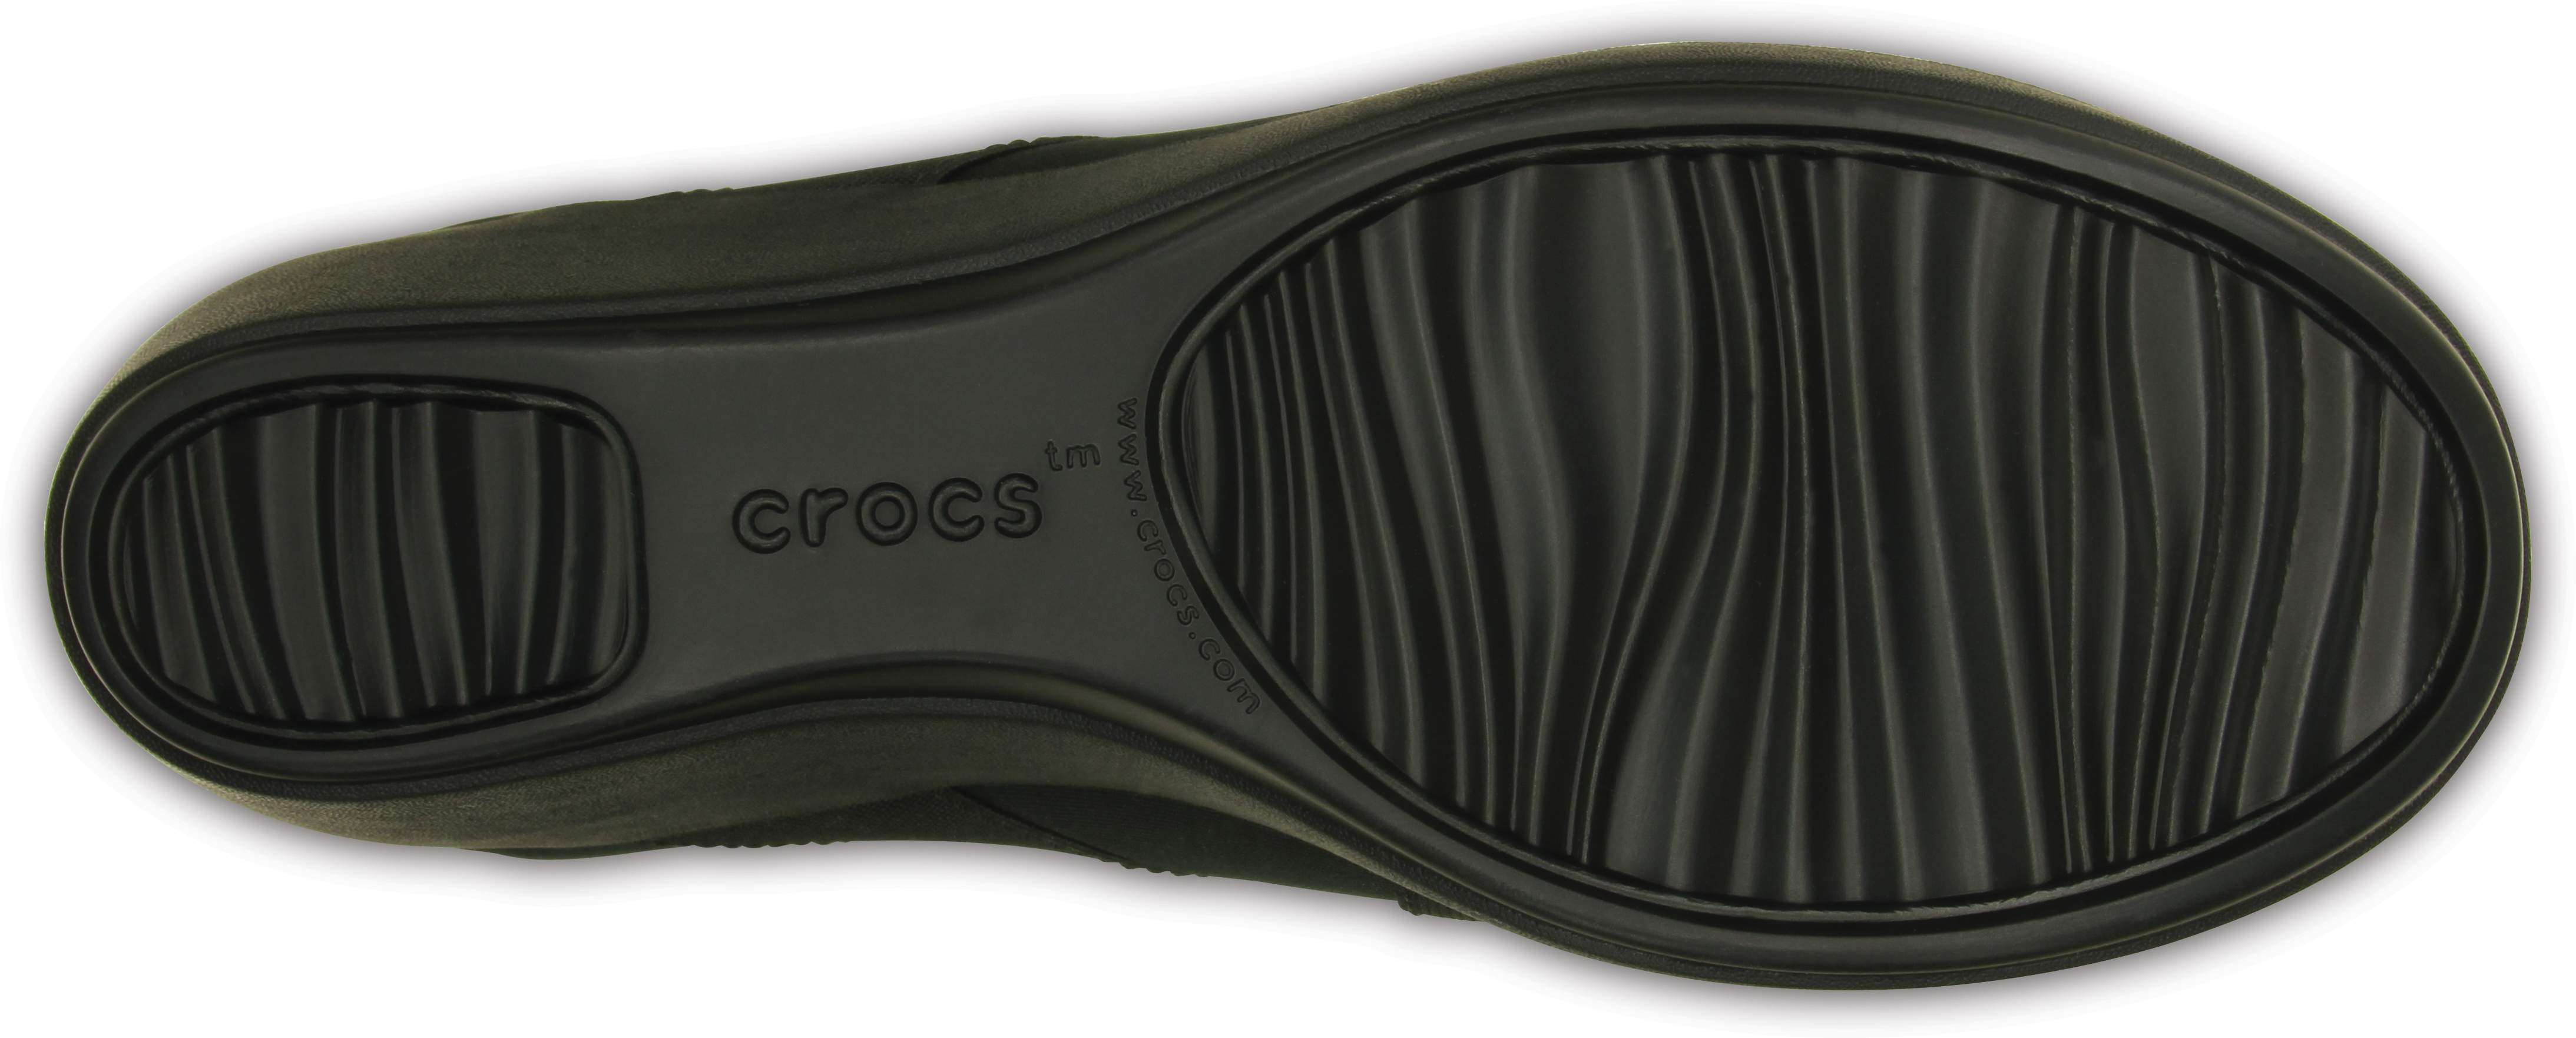 crocs busy day wedge